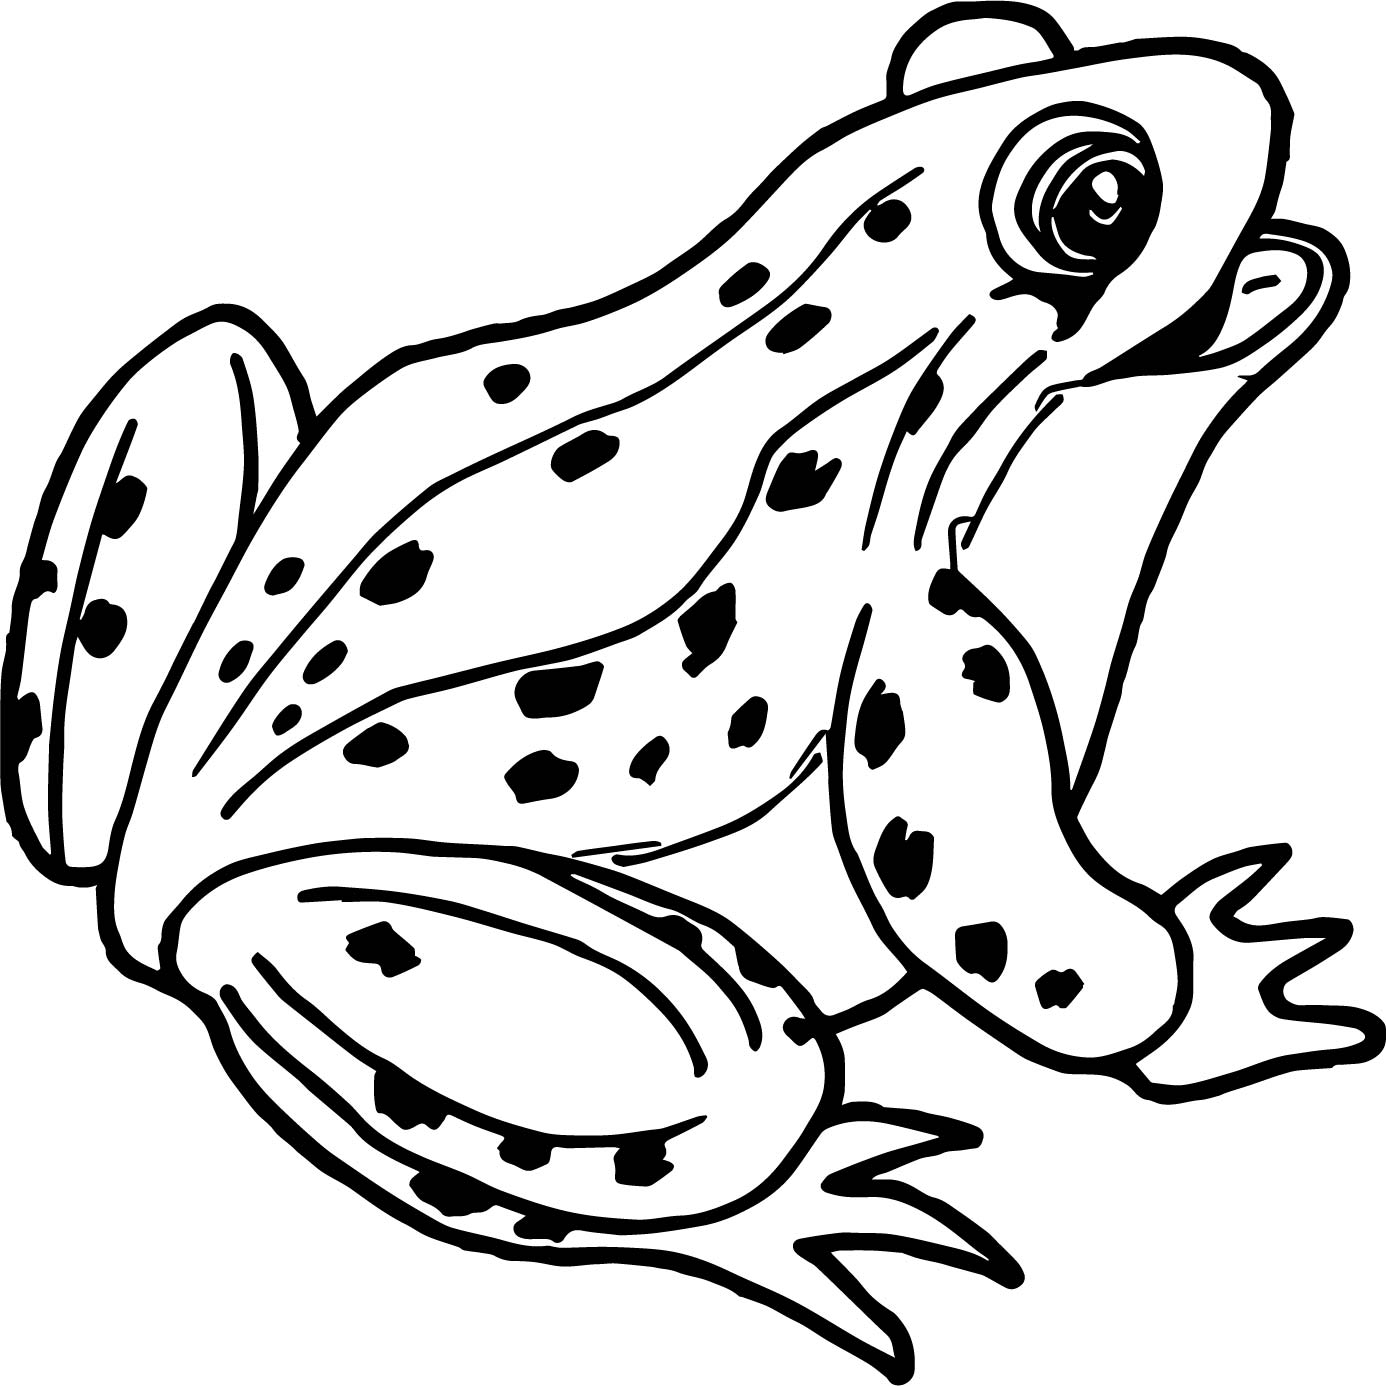 Tree Frog Coloring Pages | Free download on ClipArtMag